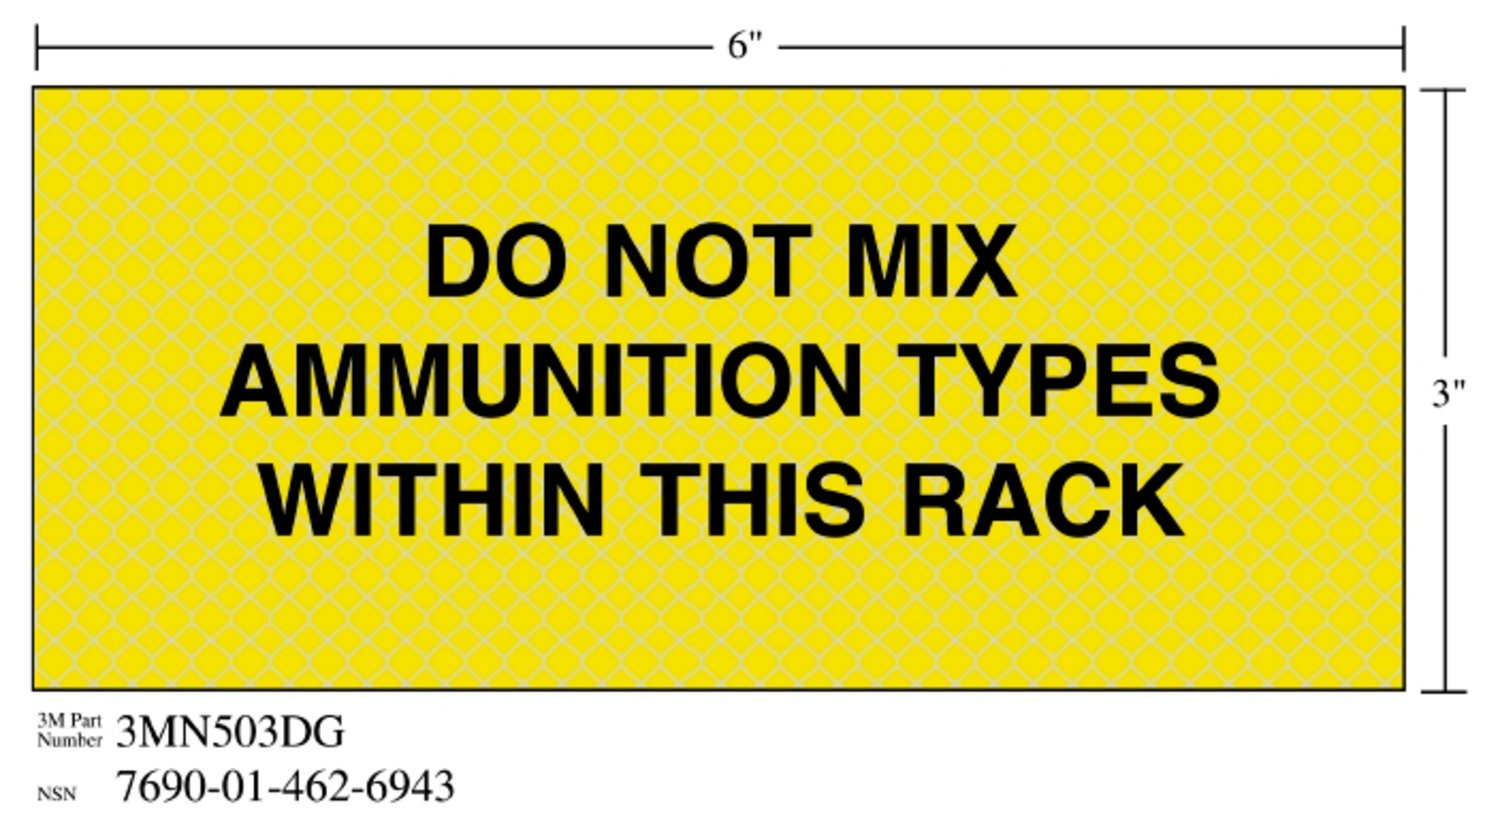 7010296999 - 3M Diamond Grade Weapon Sign 3MN503DG, "DO…RACK", 7 in x 3 in,
10/Package